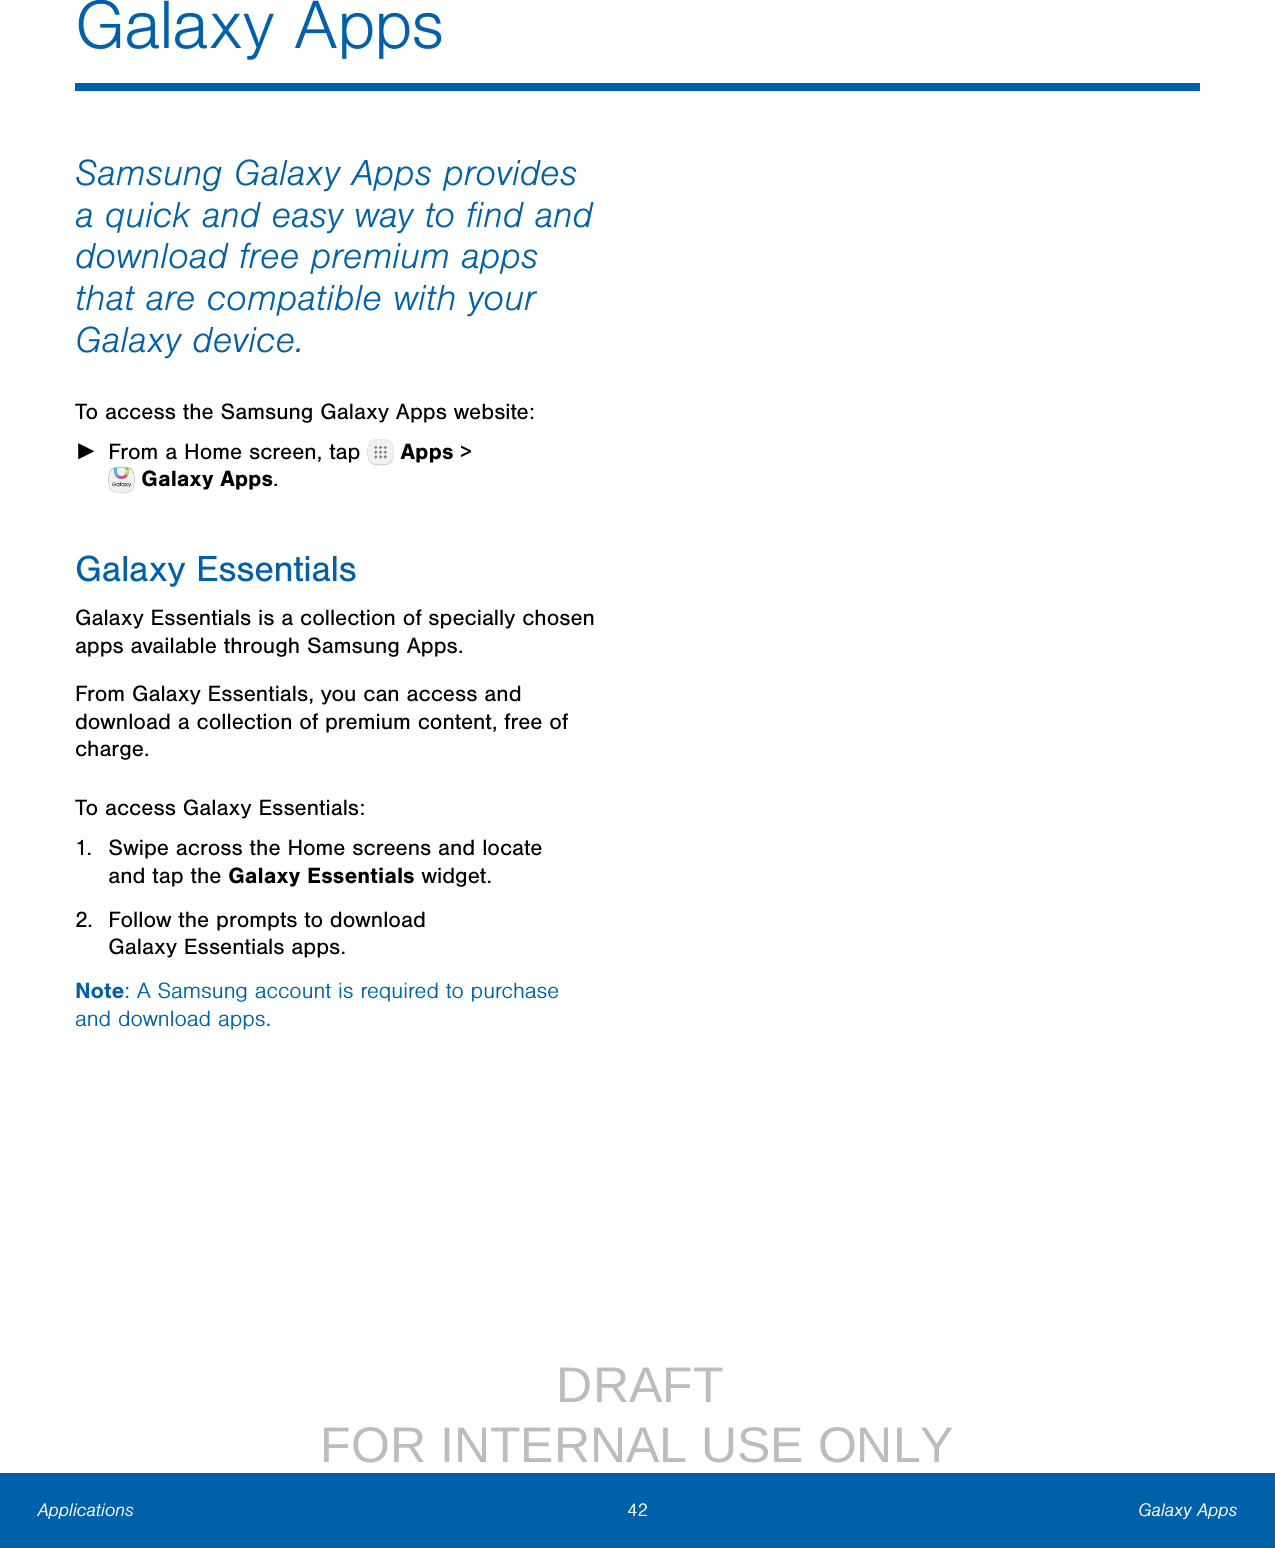                  DRAFT FOR INTERNAL USE ONLY42 Galaxy AppsApplicationsGalaxy AppsSamsung Galaxy Apps provides a quick and easy way to ﬁnd and download free premium apps that are compatible with your Galaxy device.To access the Samsung Galaxy Apps website: ►From a Home screen, tap   Apps &gt; GalaxyApps.Galaxy EssentialsGalaxy Essentials is a collection of specially chosen apps available through Samsung Apps.From Galaxy Essentials, you can access and download a collection of premium content, free of charge.To access Galaxy Essentials:1.  Swipe across the Home screens and locate andtap the Galaxy Essentials widget.2.  Follow the prompts to download GalaxyEssentials apps.Note: A Samsung account is required to purchase and downloadapps.